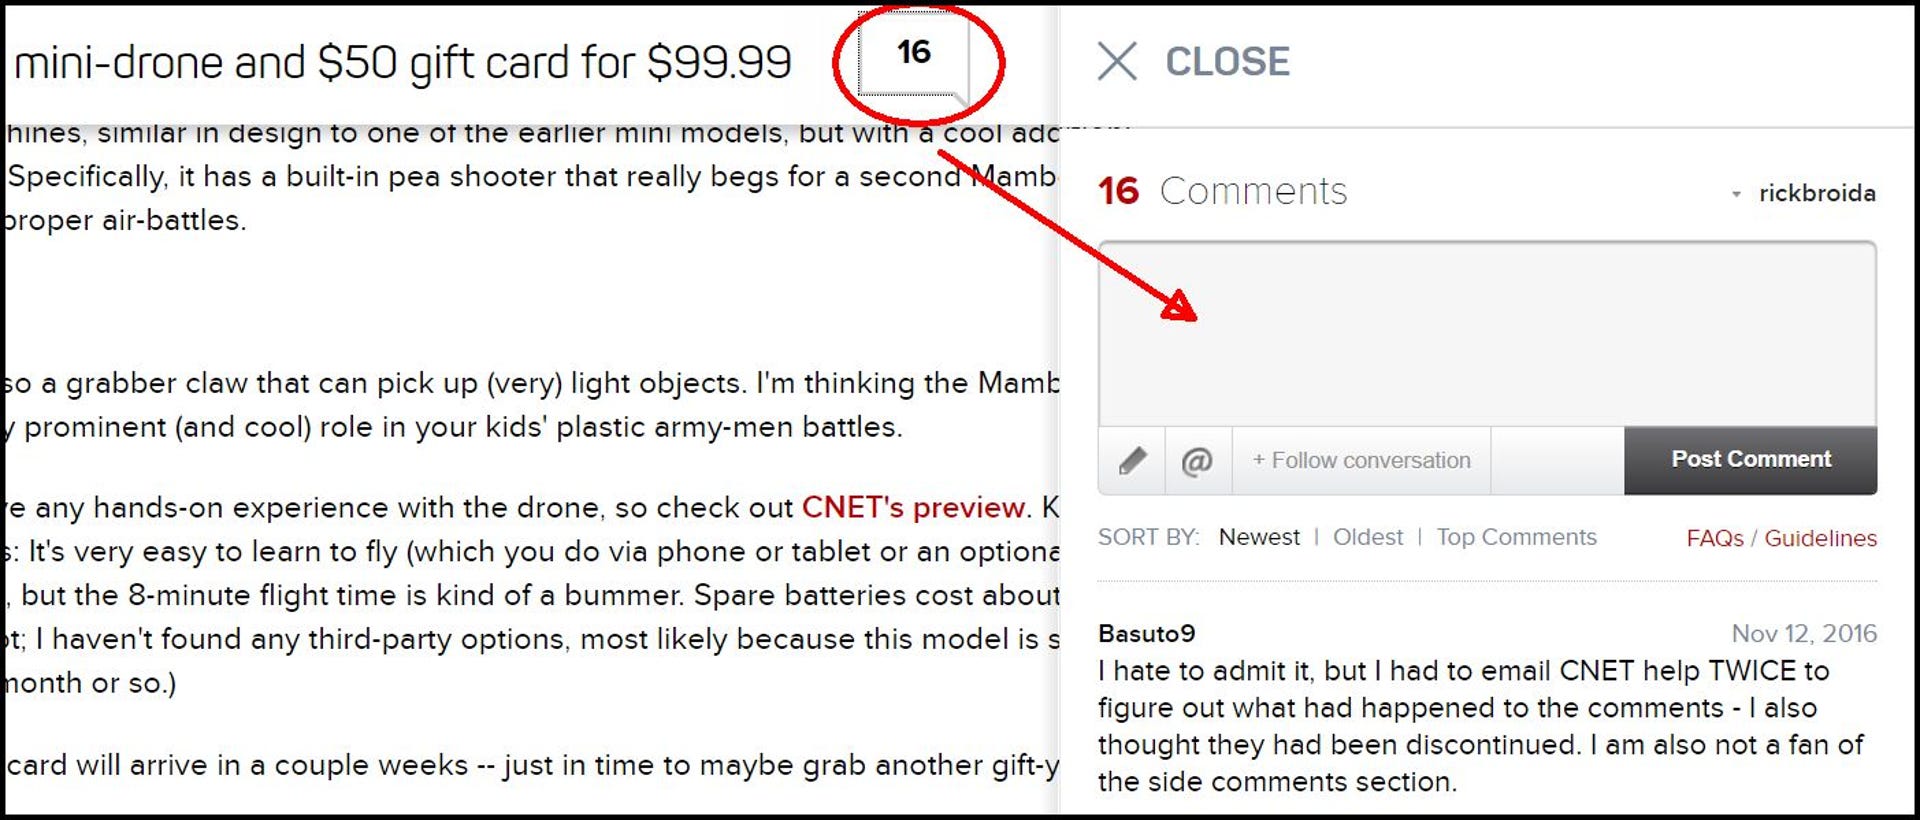 cnet-new-comments-toolbar.jpg